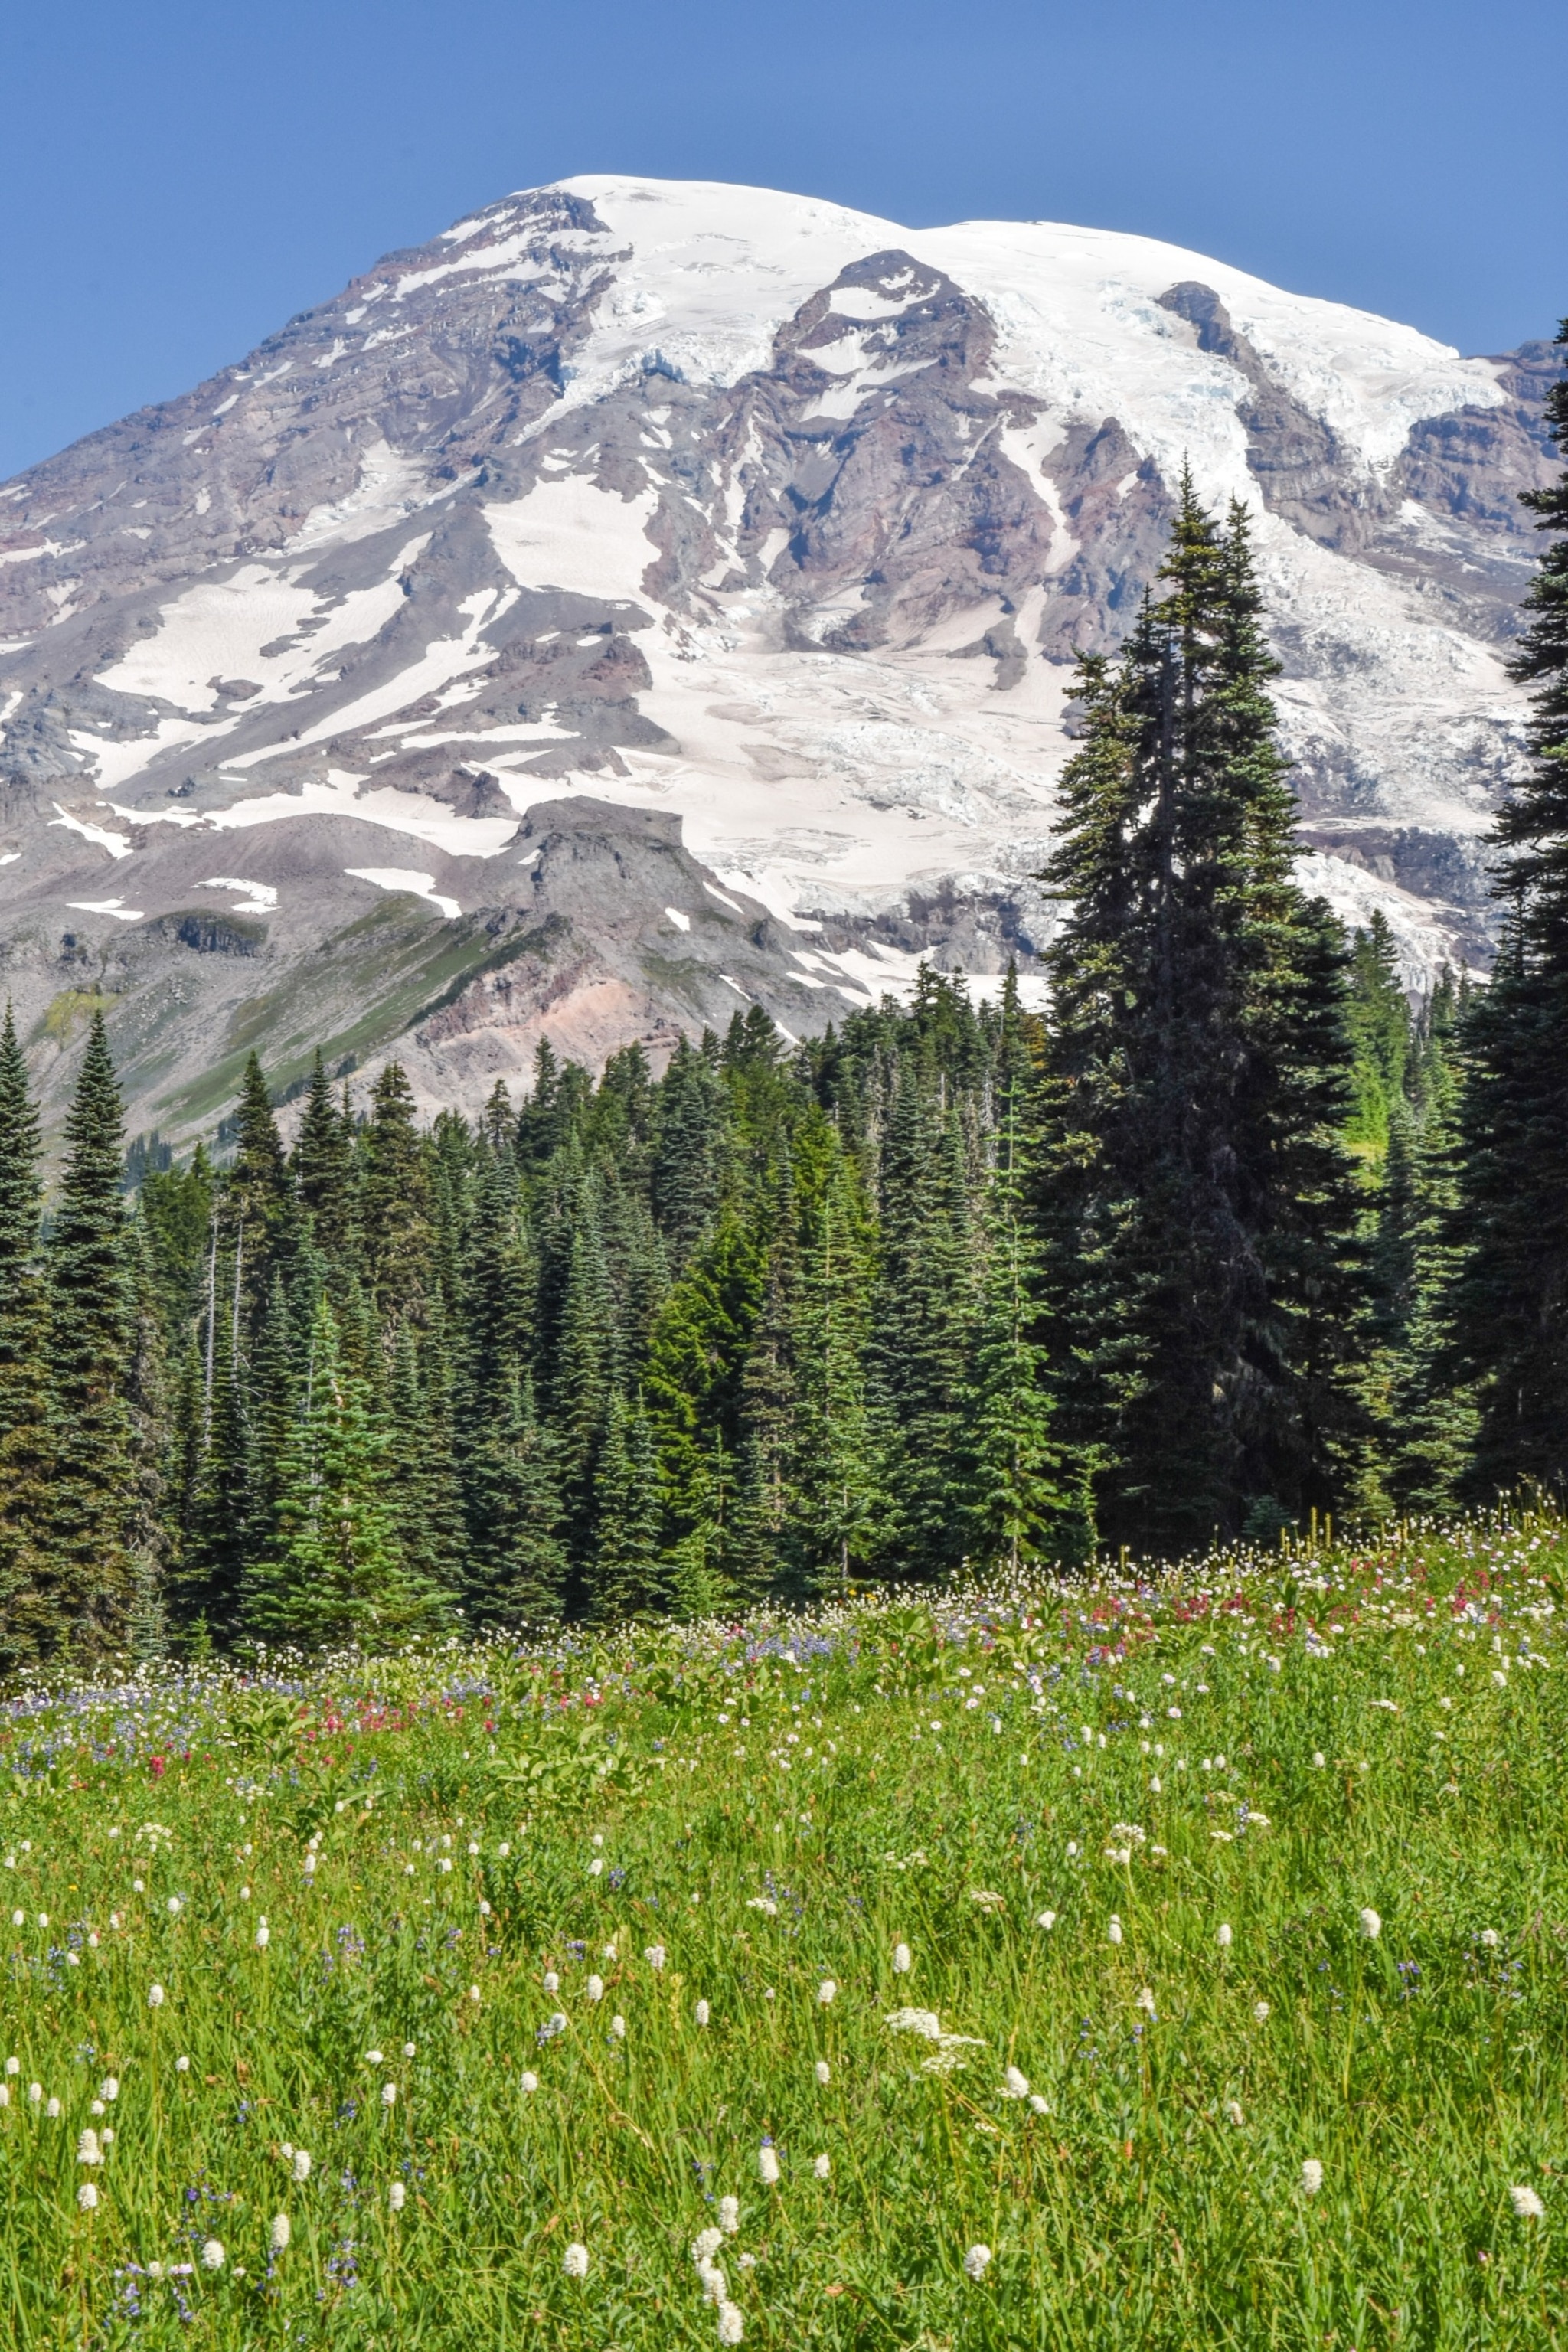 PHOTO: Mount Rainier sits high above the treeline surrounded by subalpine meadows full of flowers, Paradise, WA.